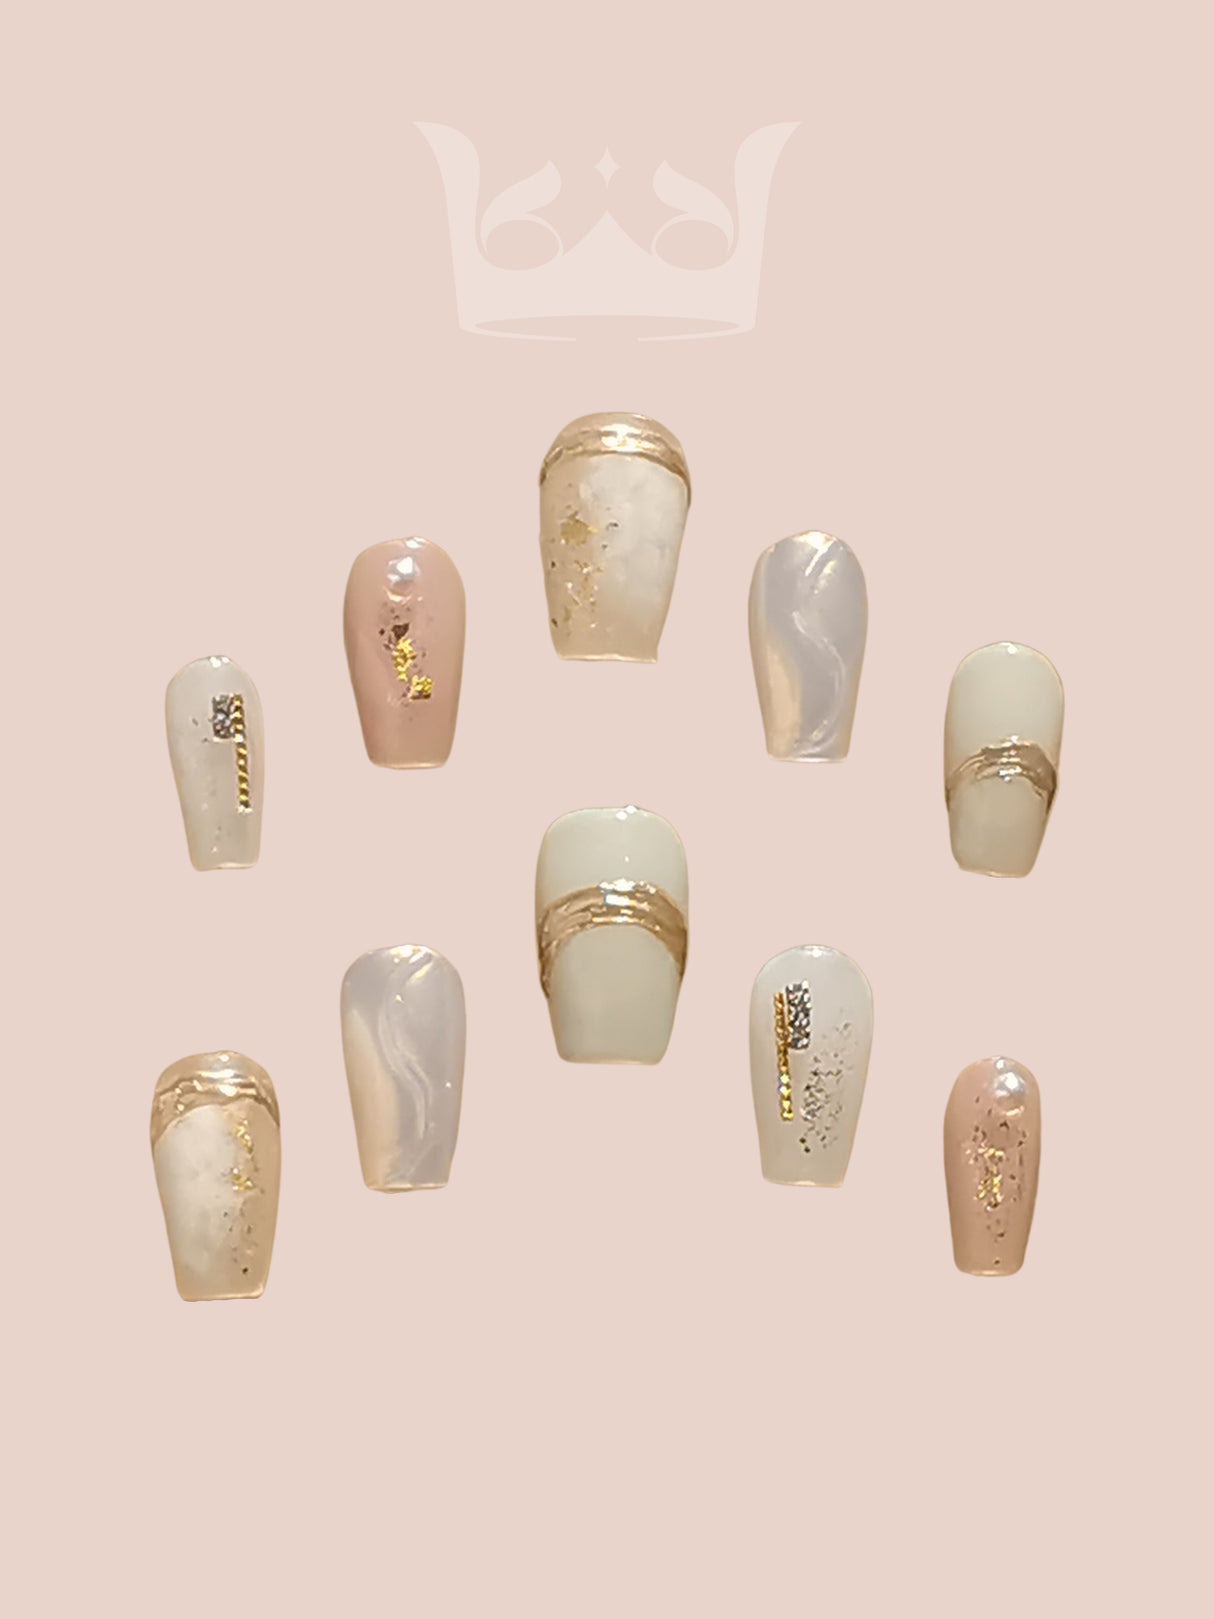 These press-on nails are designed for a fashionable and polished look with a soft color palette and gold accents, targeting those who prefer understated elegance.